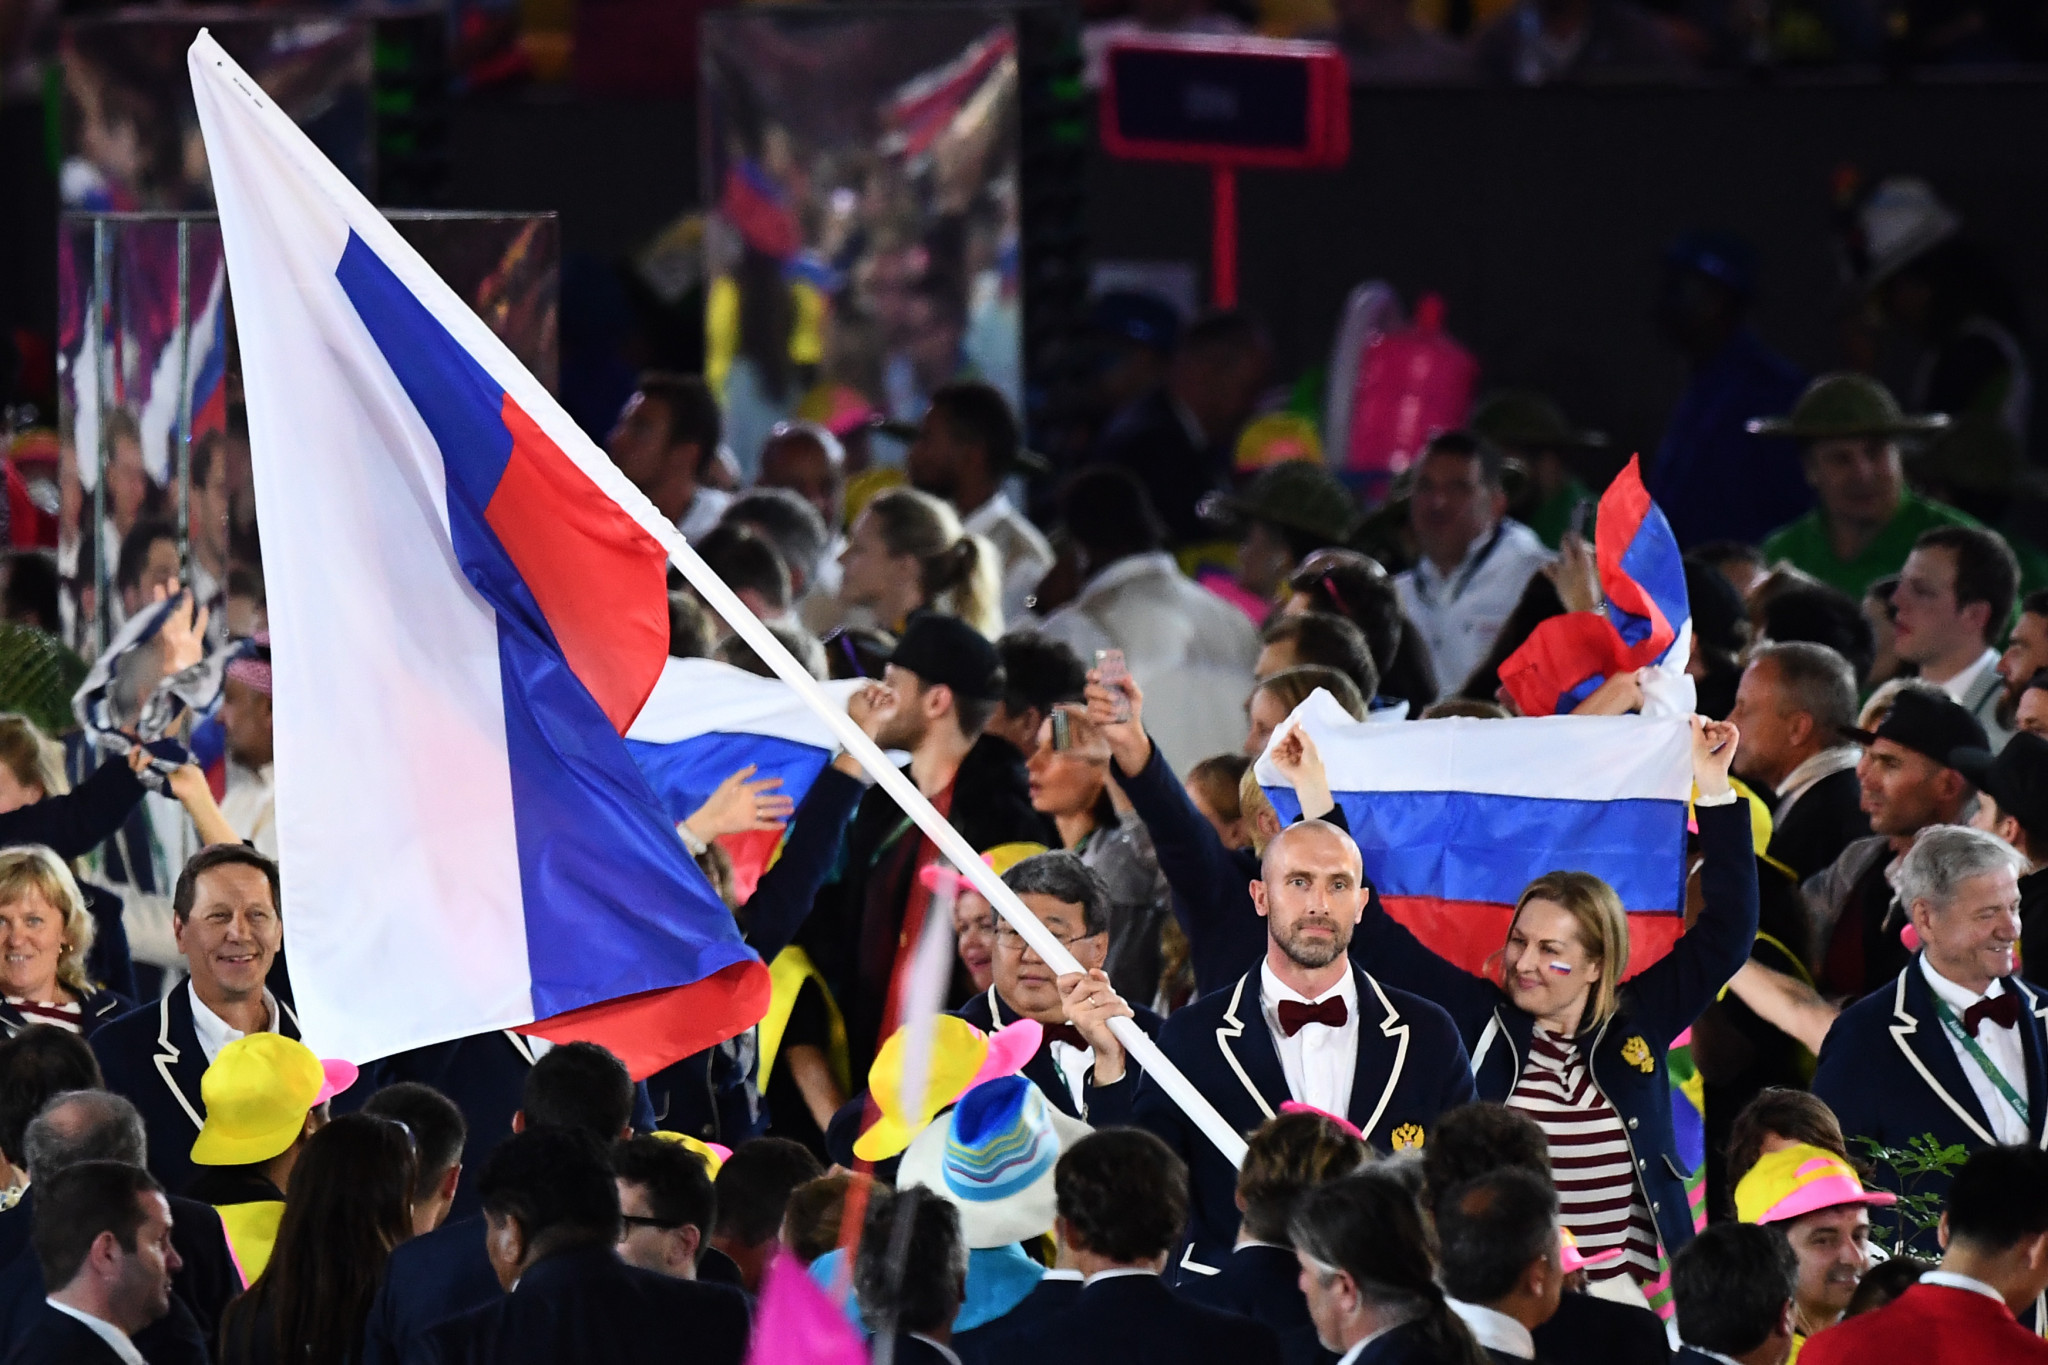 The Russian flag will not be allowed to be displayed at an Olympic Games and World Championships that falls during the period when the sanctions are in force ©Getty Images